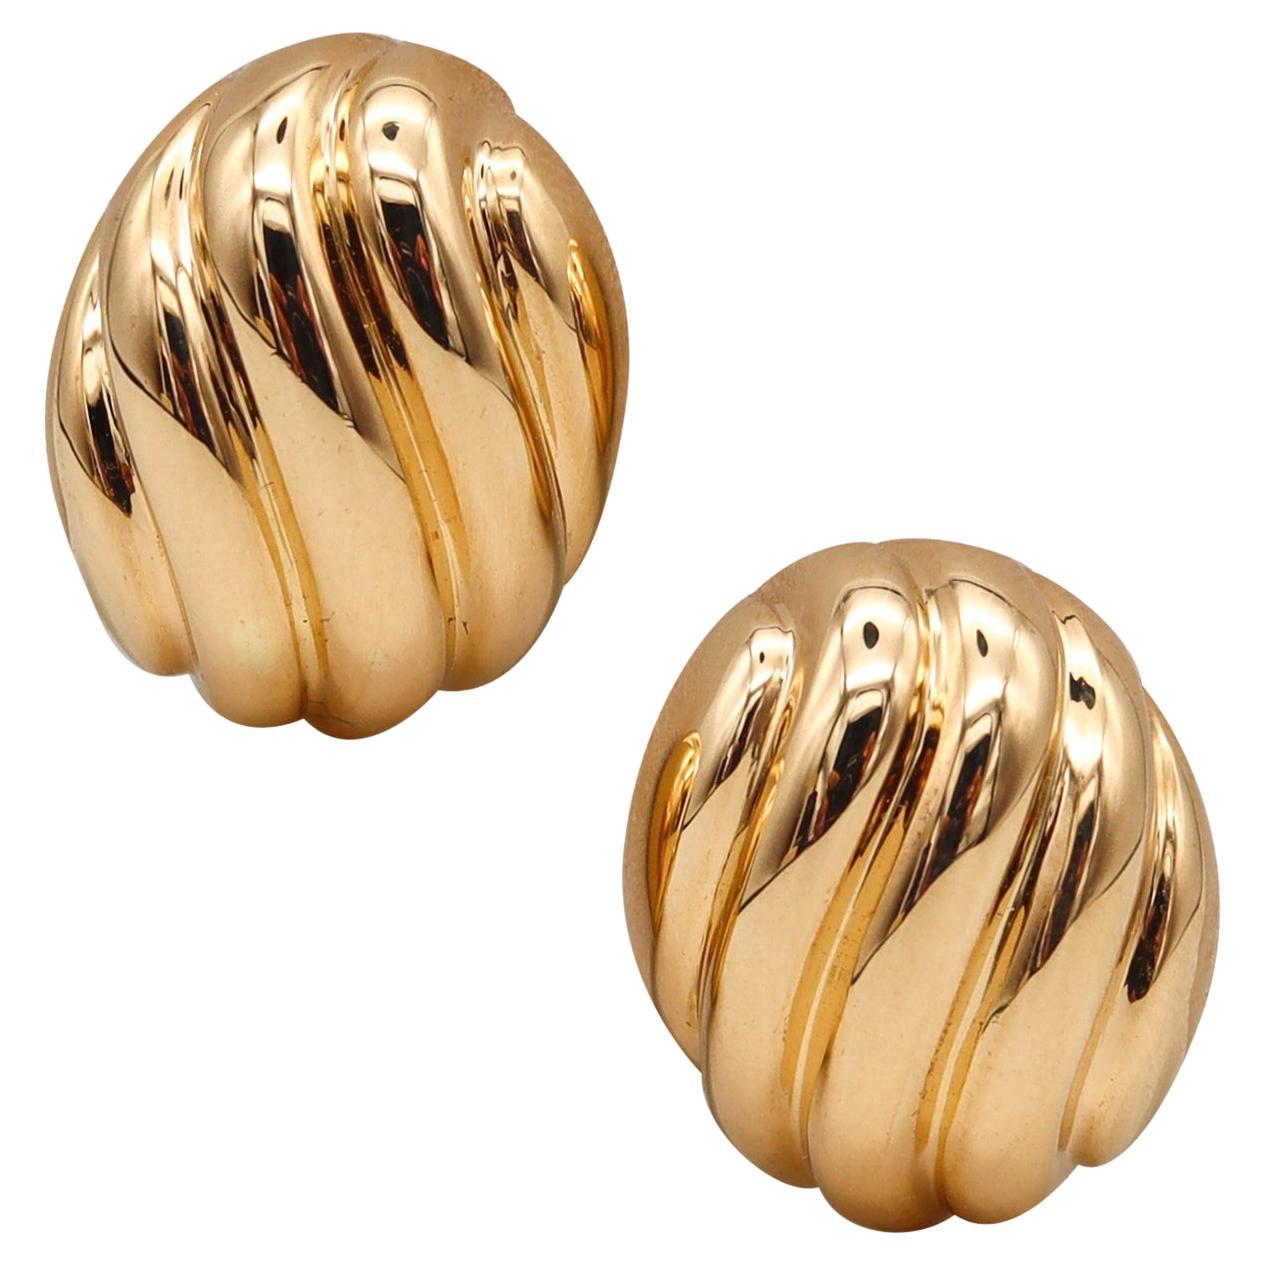 Cartier Paris 1970 Wavy Oval Clips on Earrings in Solid 18kt Yellow Gold